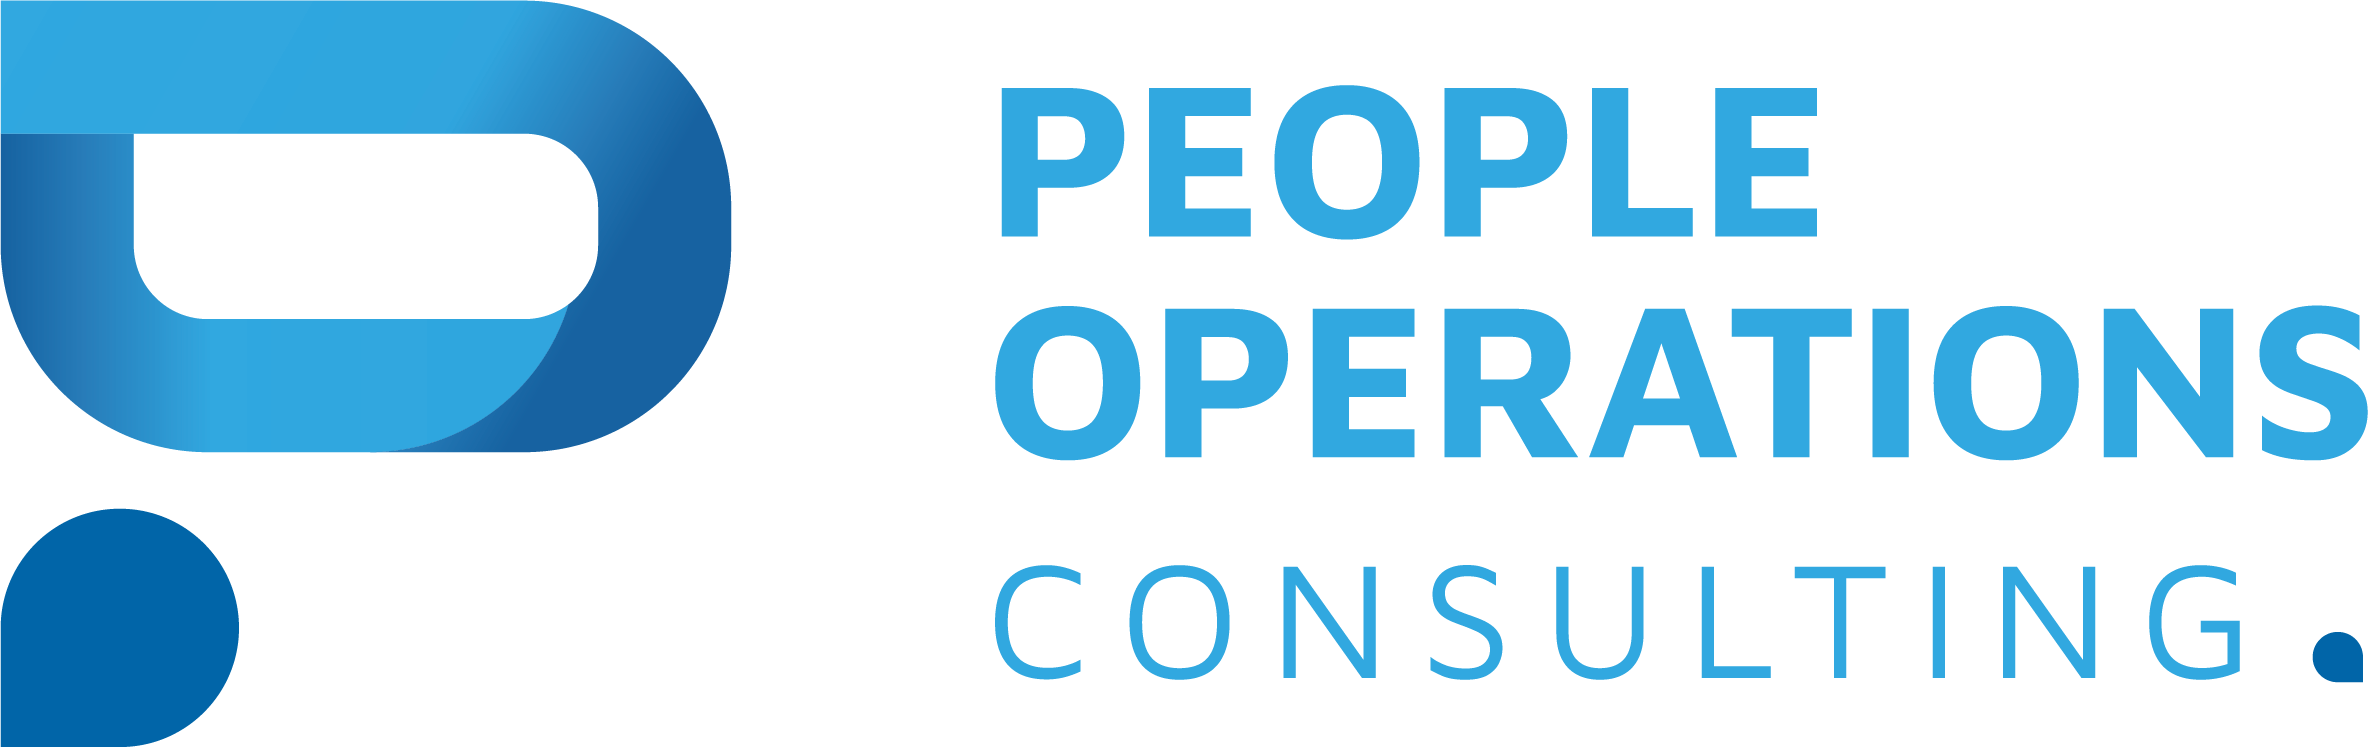 People Operations Consulting